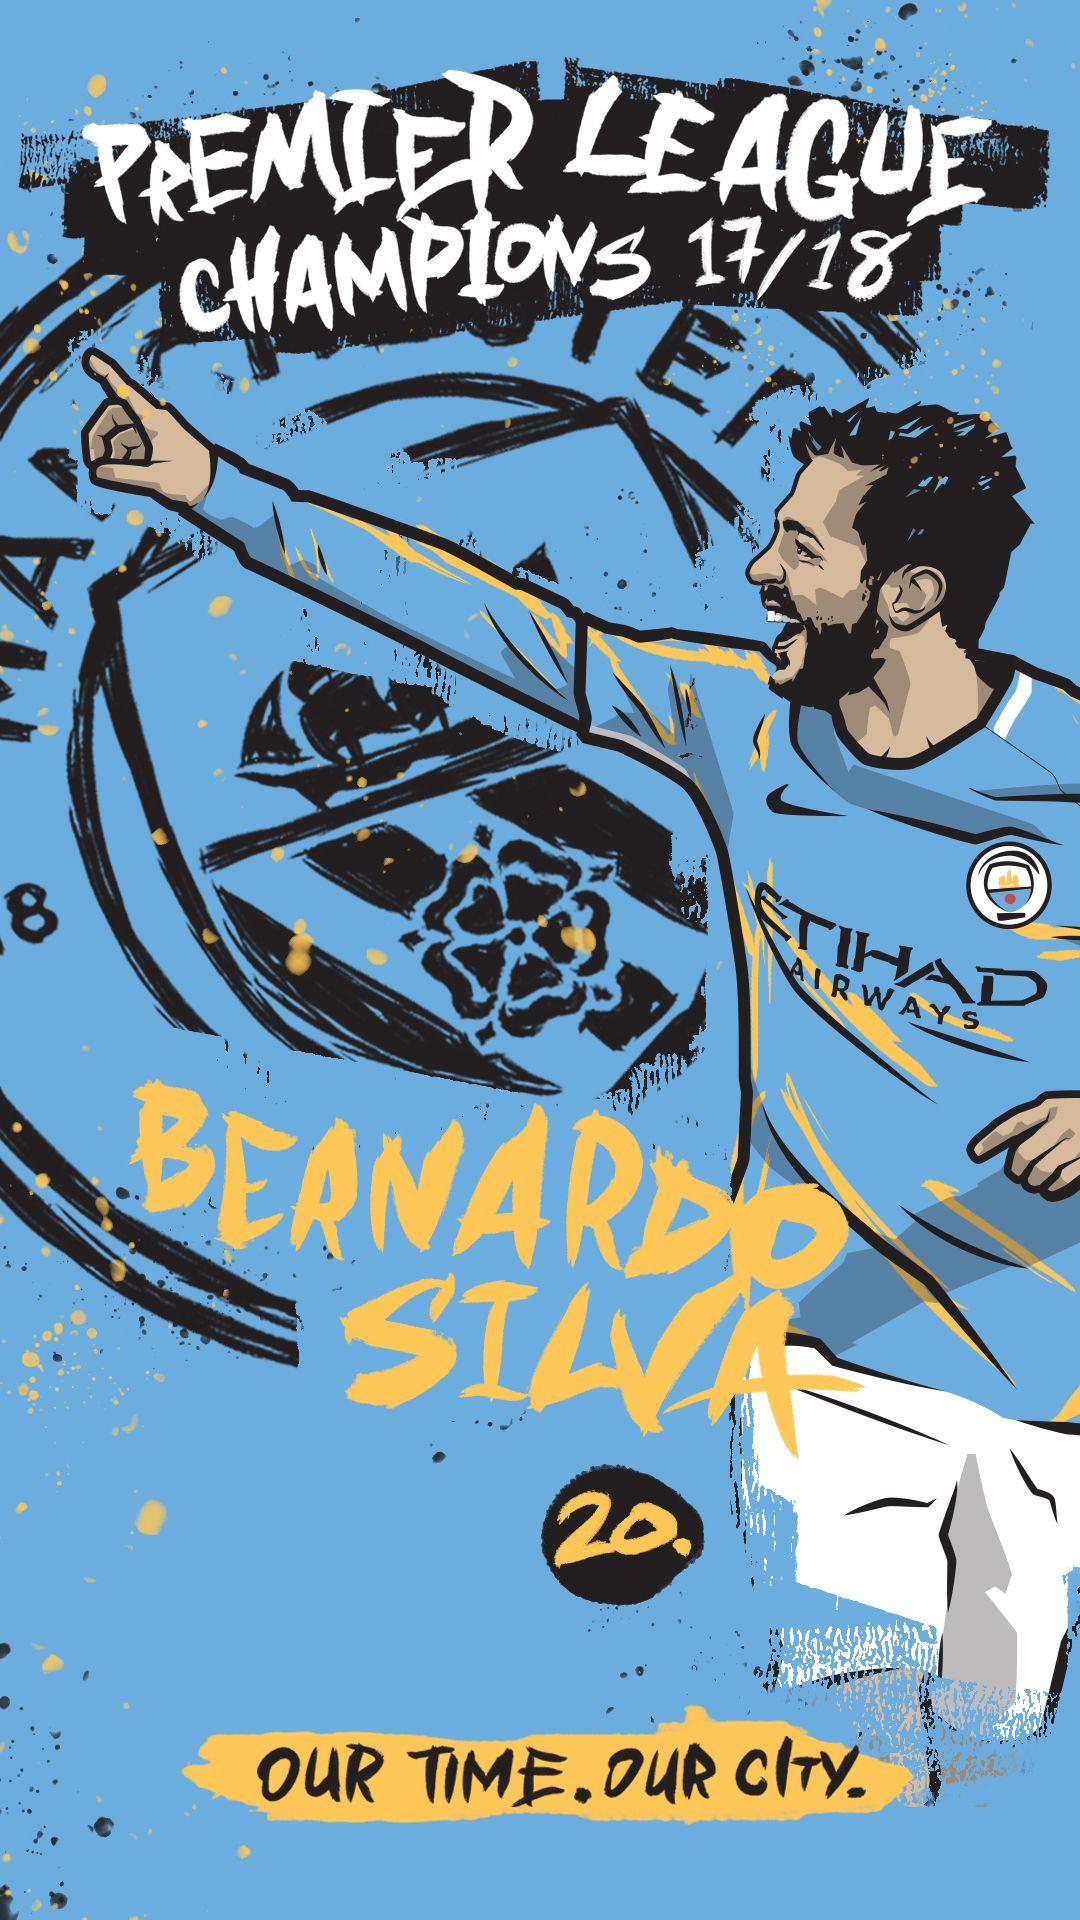 Manchester City 2018 Wallpapers - Wallpaper Cave